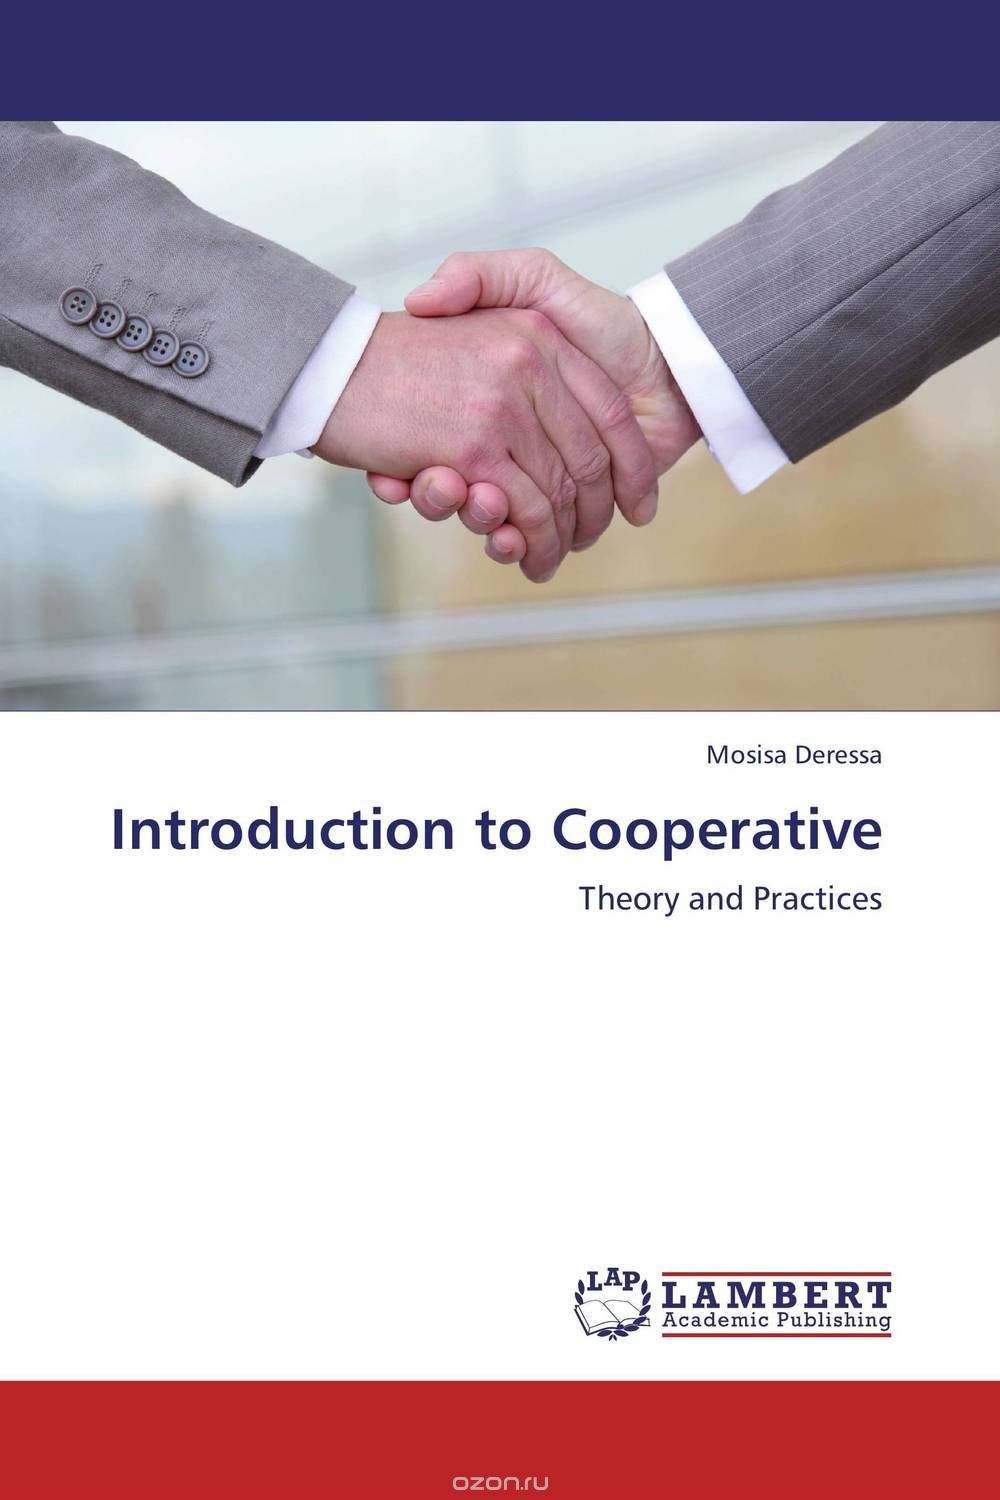 Introduction to Cooperative